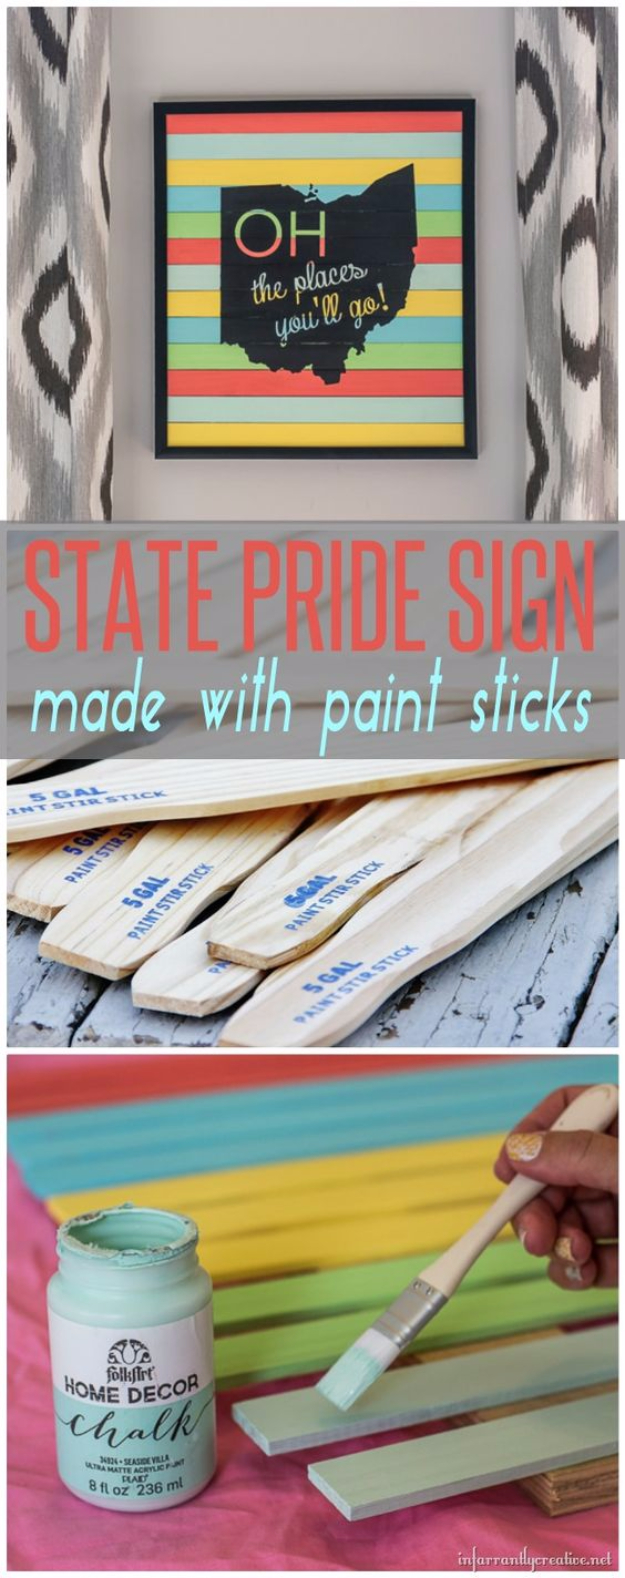 15 Fun And Easy DIY Paint Stick Ideas To Spice Up Your Home Decor